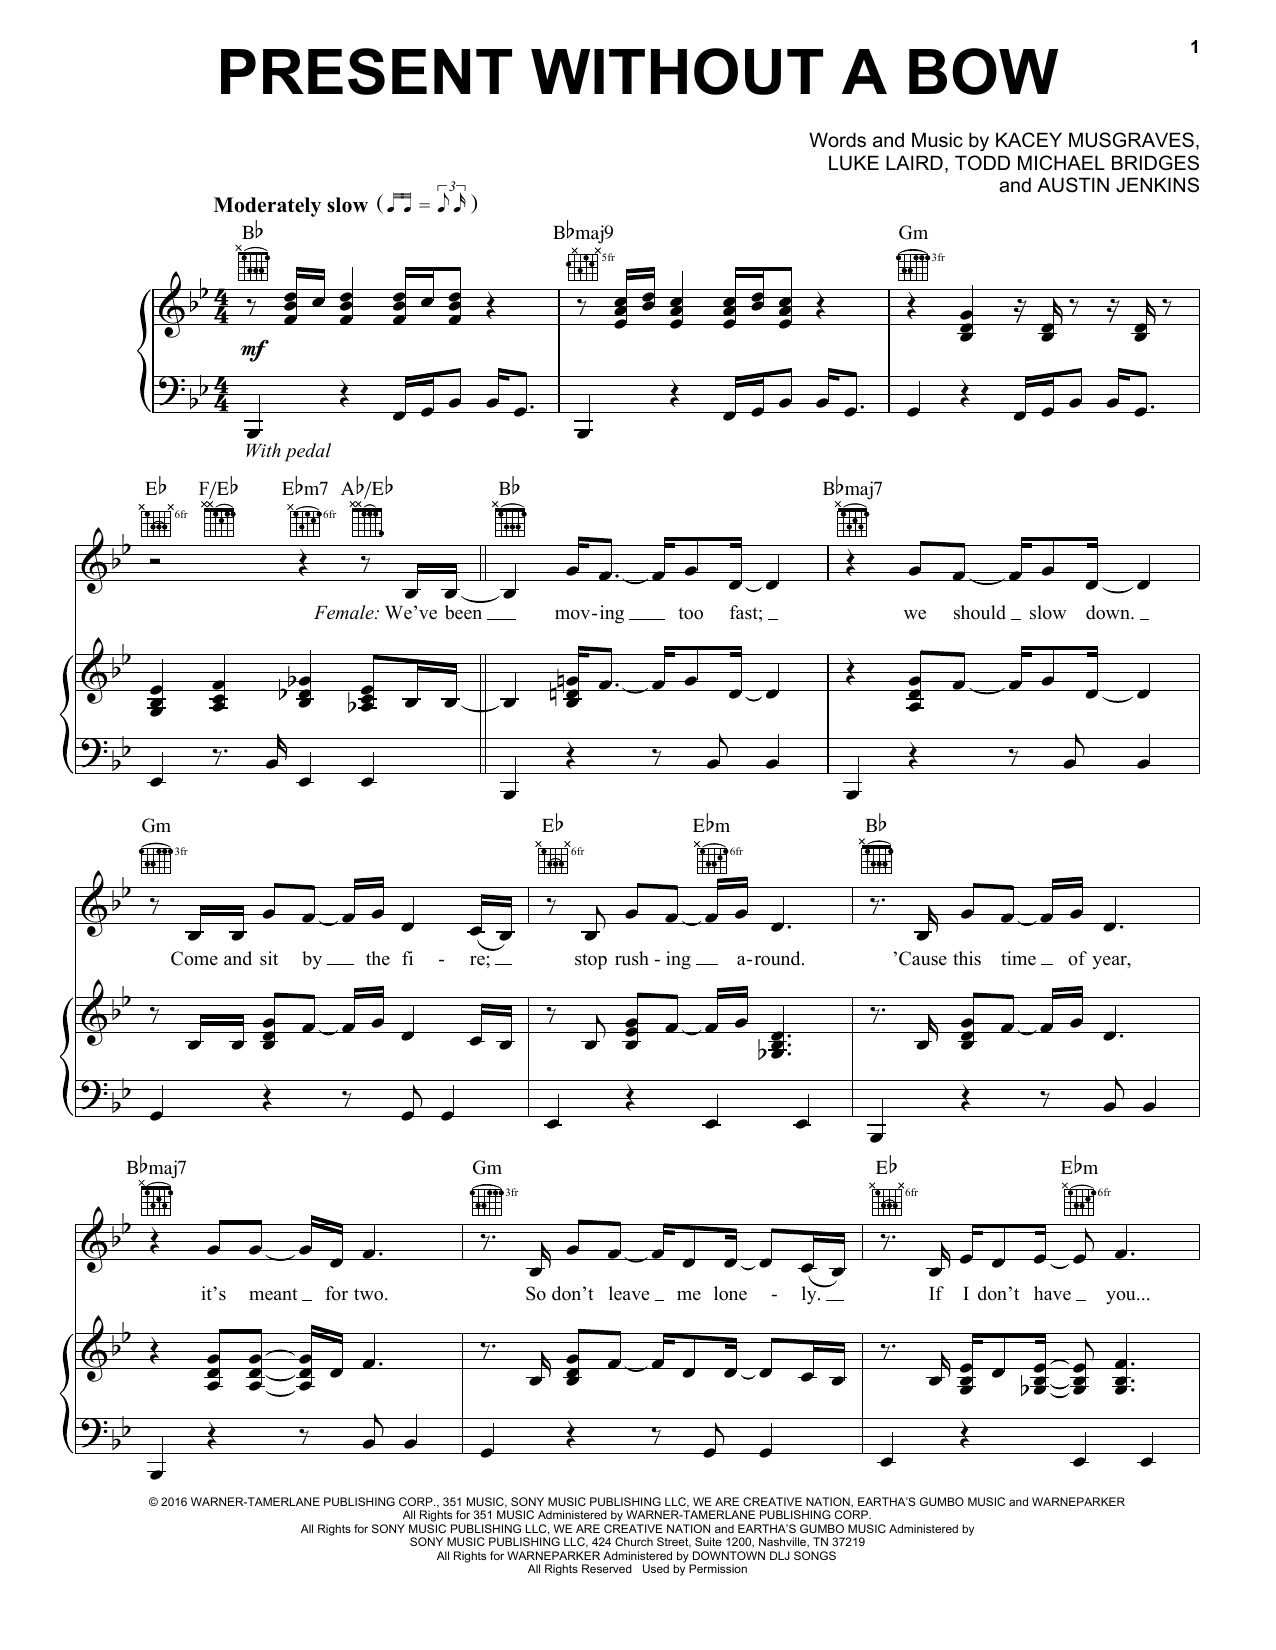 Download Kacey Musgraves Present Without A Bow (feat. Leon Bridg Sheet Music